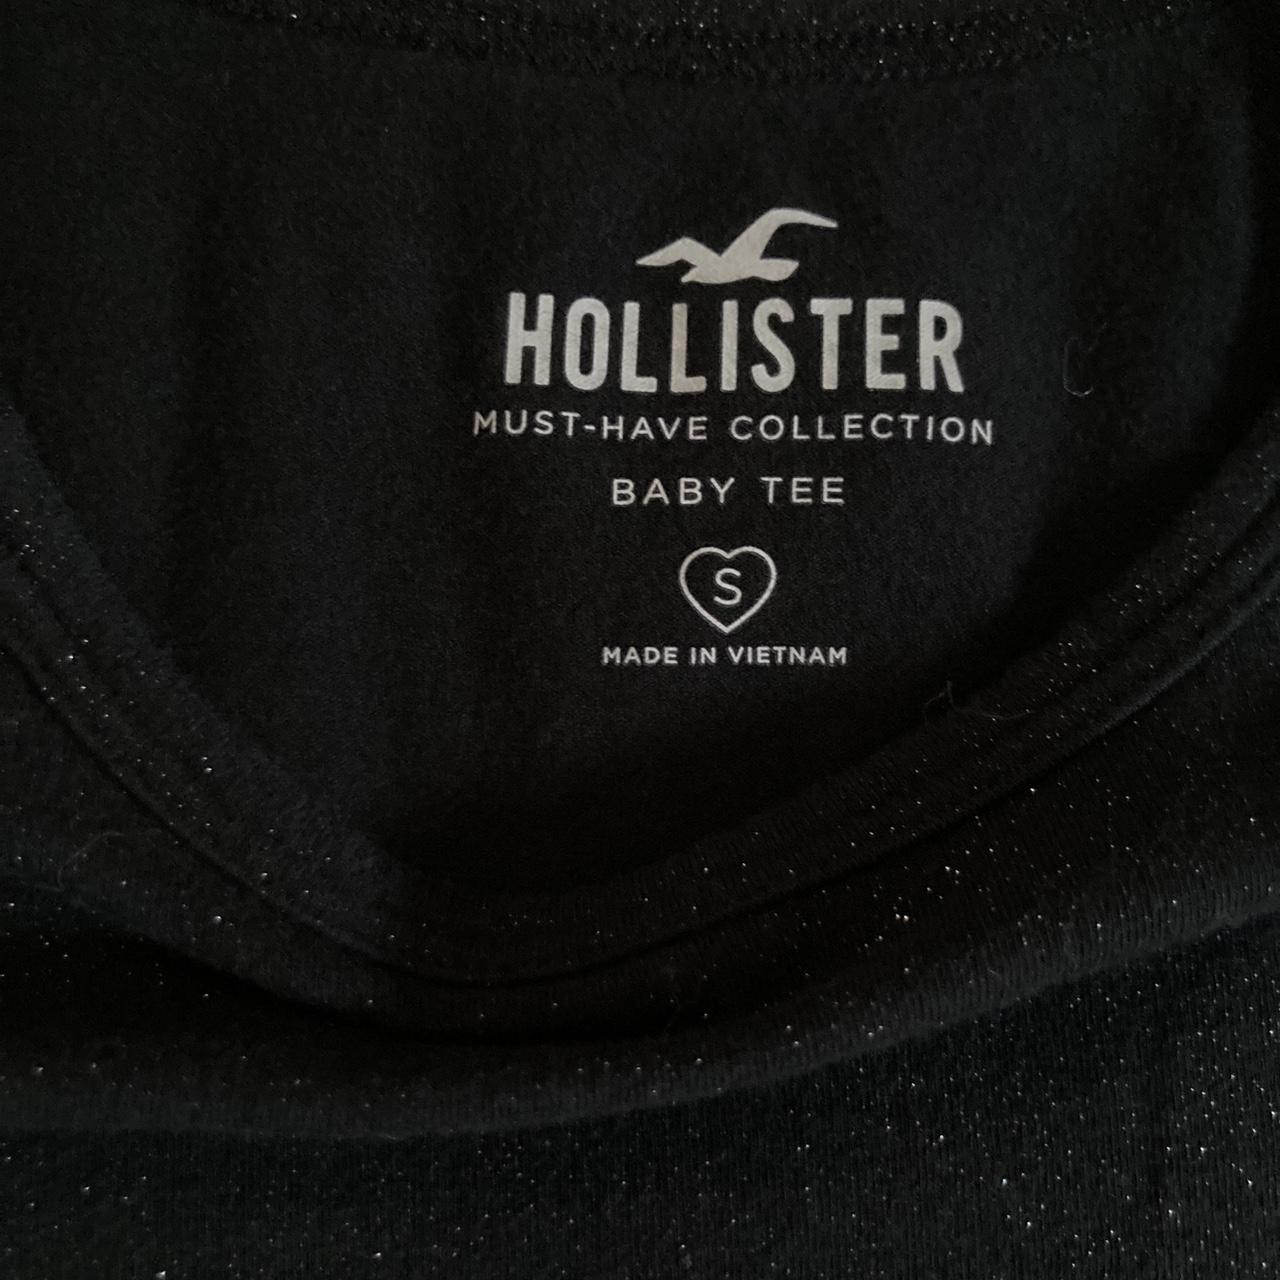 Hollister Long-Sleeve Shimmer Baby Tee